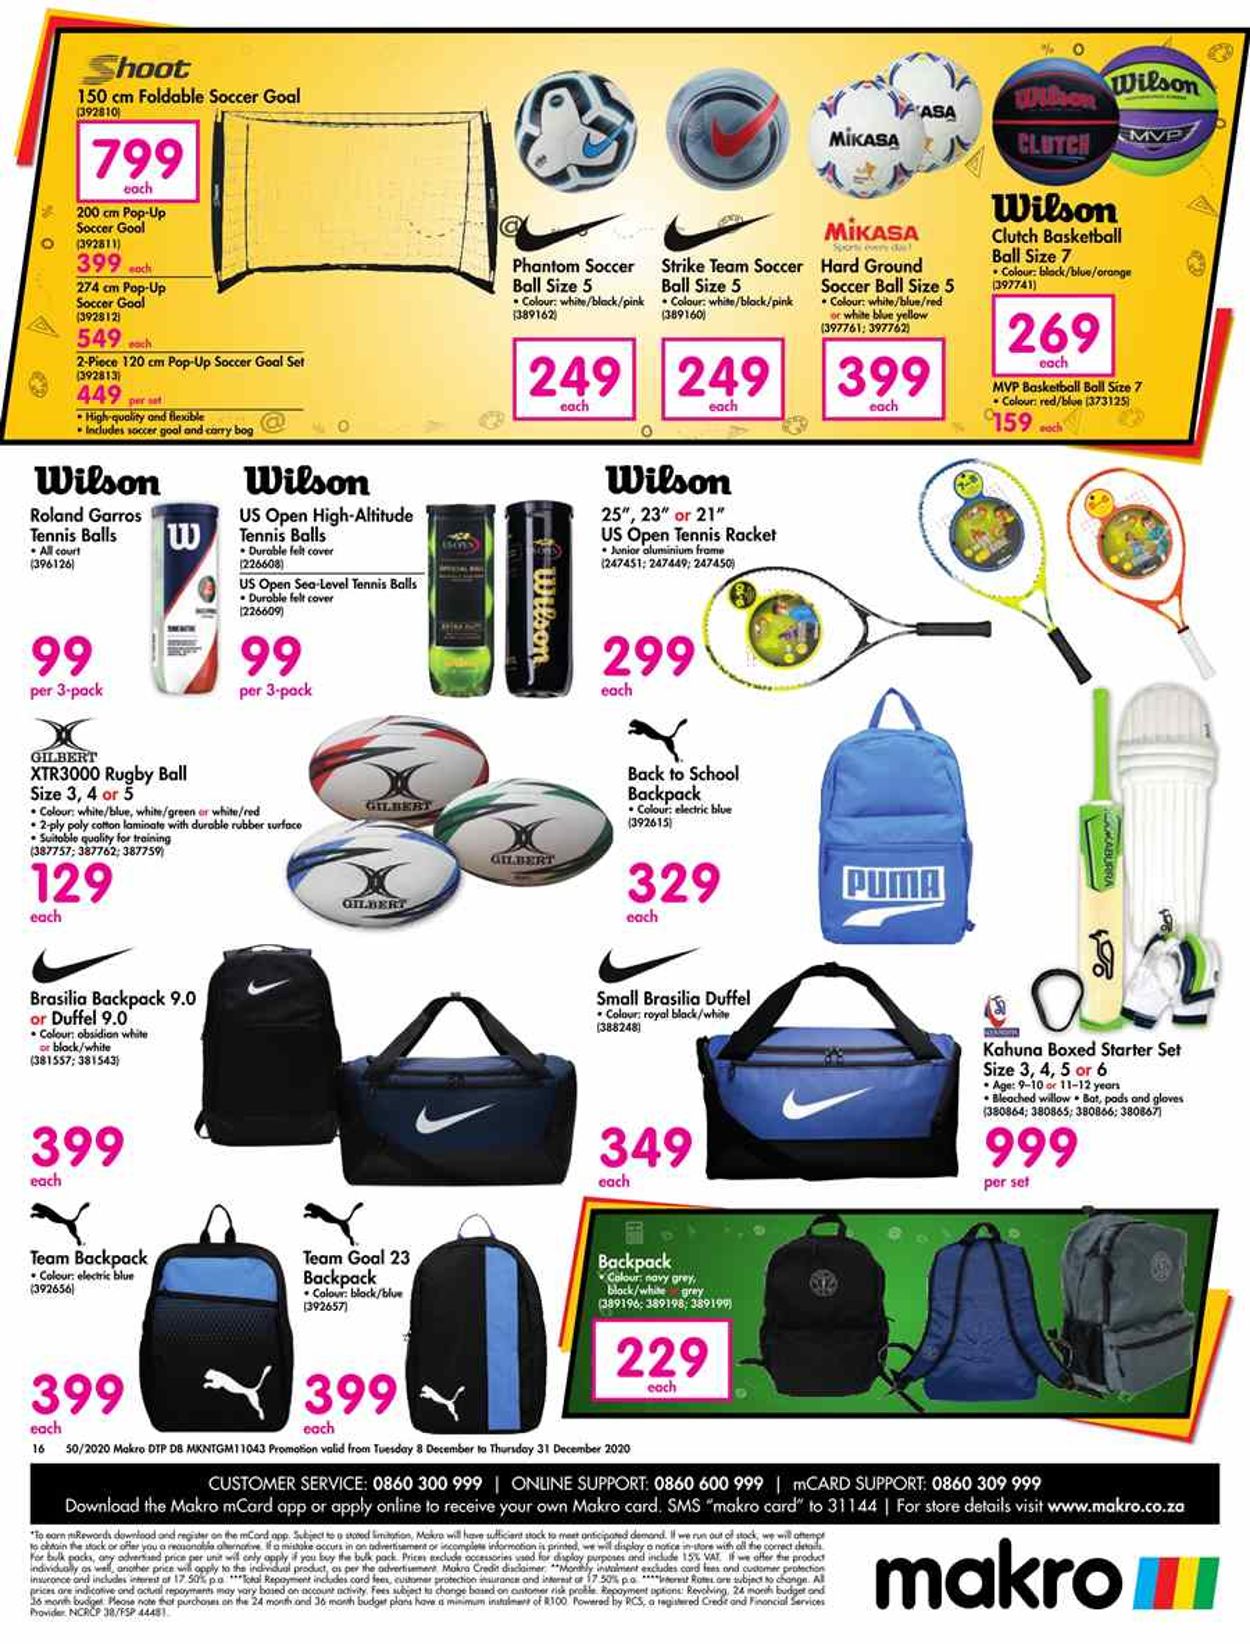 Makro Back To School 2020 Catalogue - 2020/12/08-2020/12/31 (Page 16)